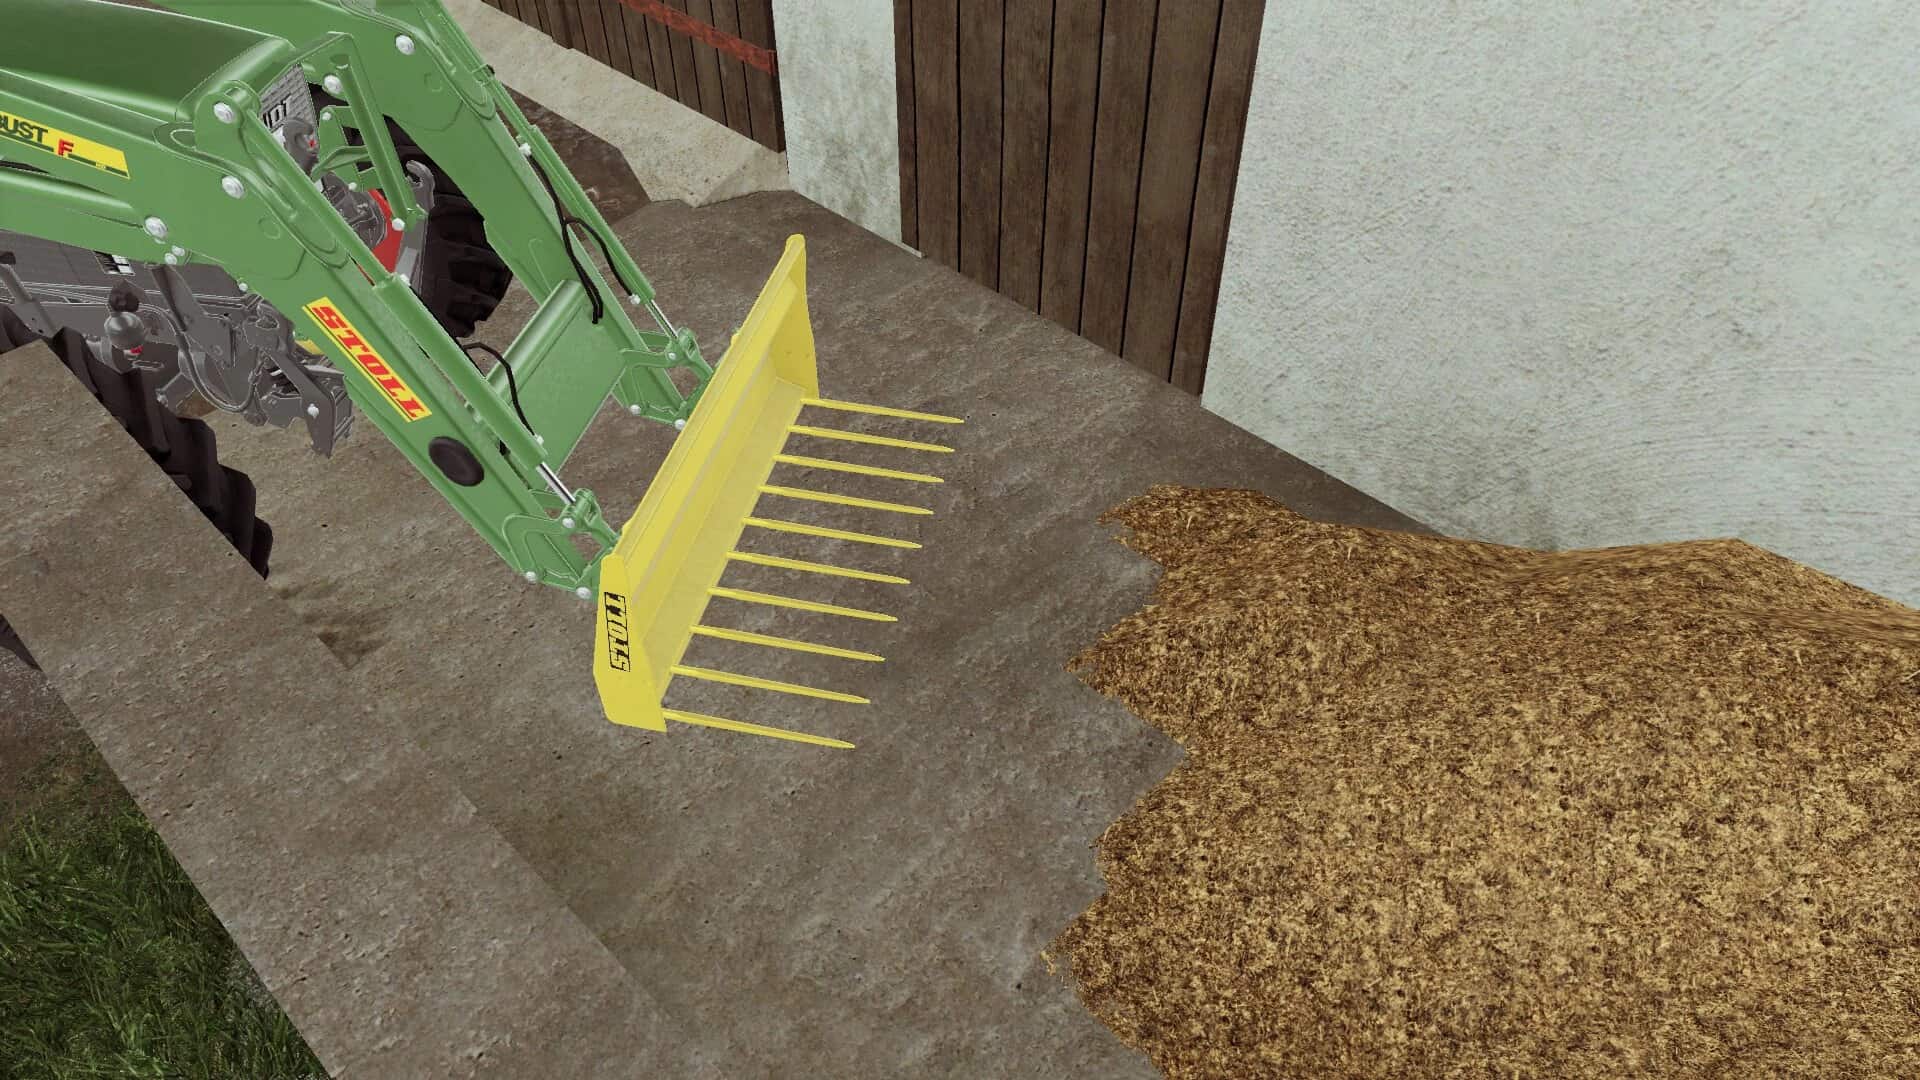 Fs19 Stoll Front Loader Tools V10 Fs 19 Implements And Tools Mod Download 0028